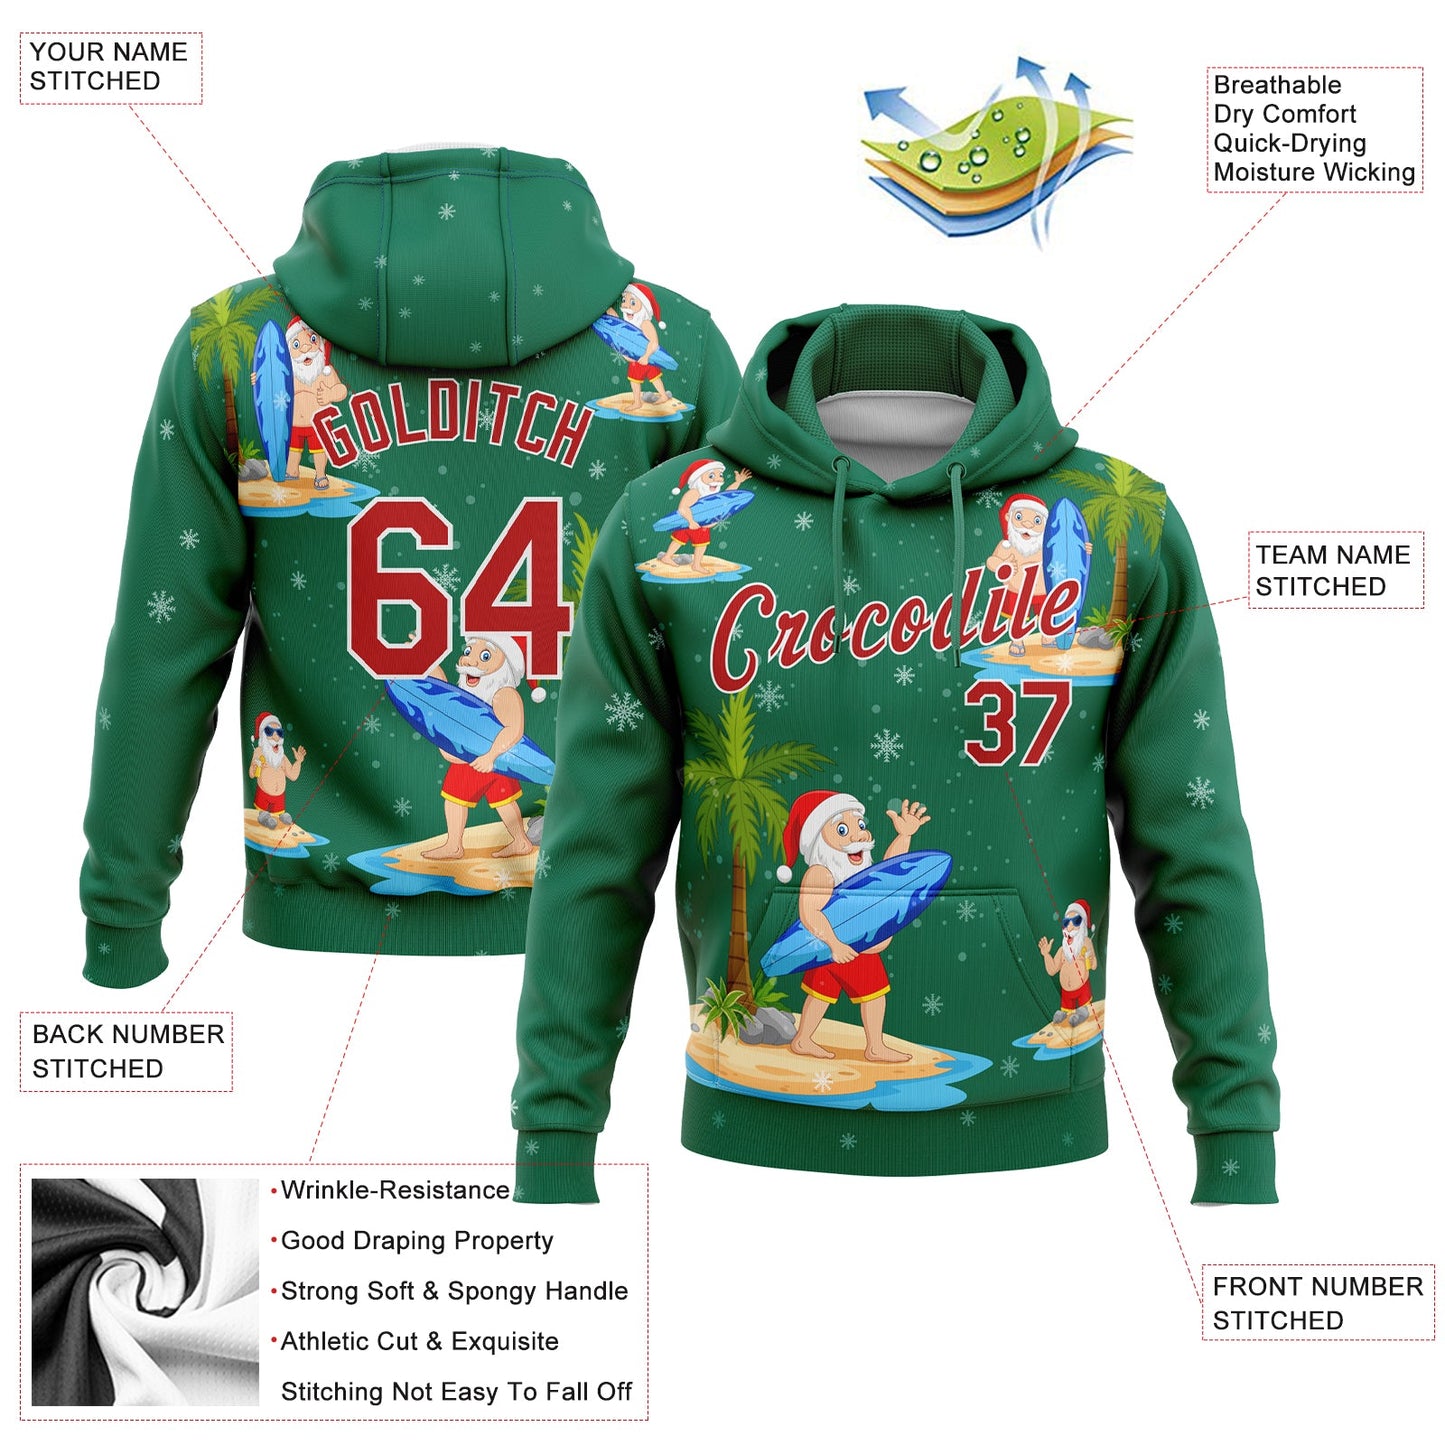 Custom Stitched Kelly Green Red-White 3D Tropical Christmas Surfing Santas Sports Pullover Sweatshirt Hoodie